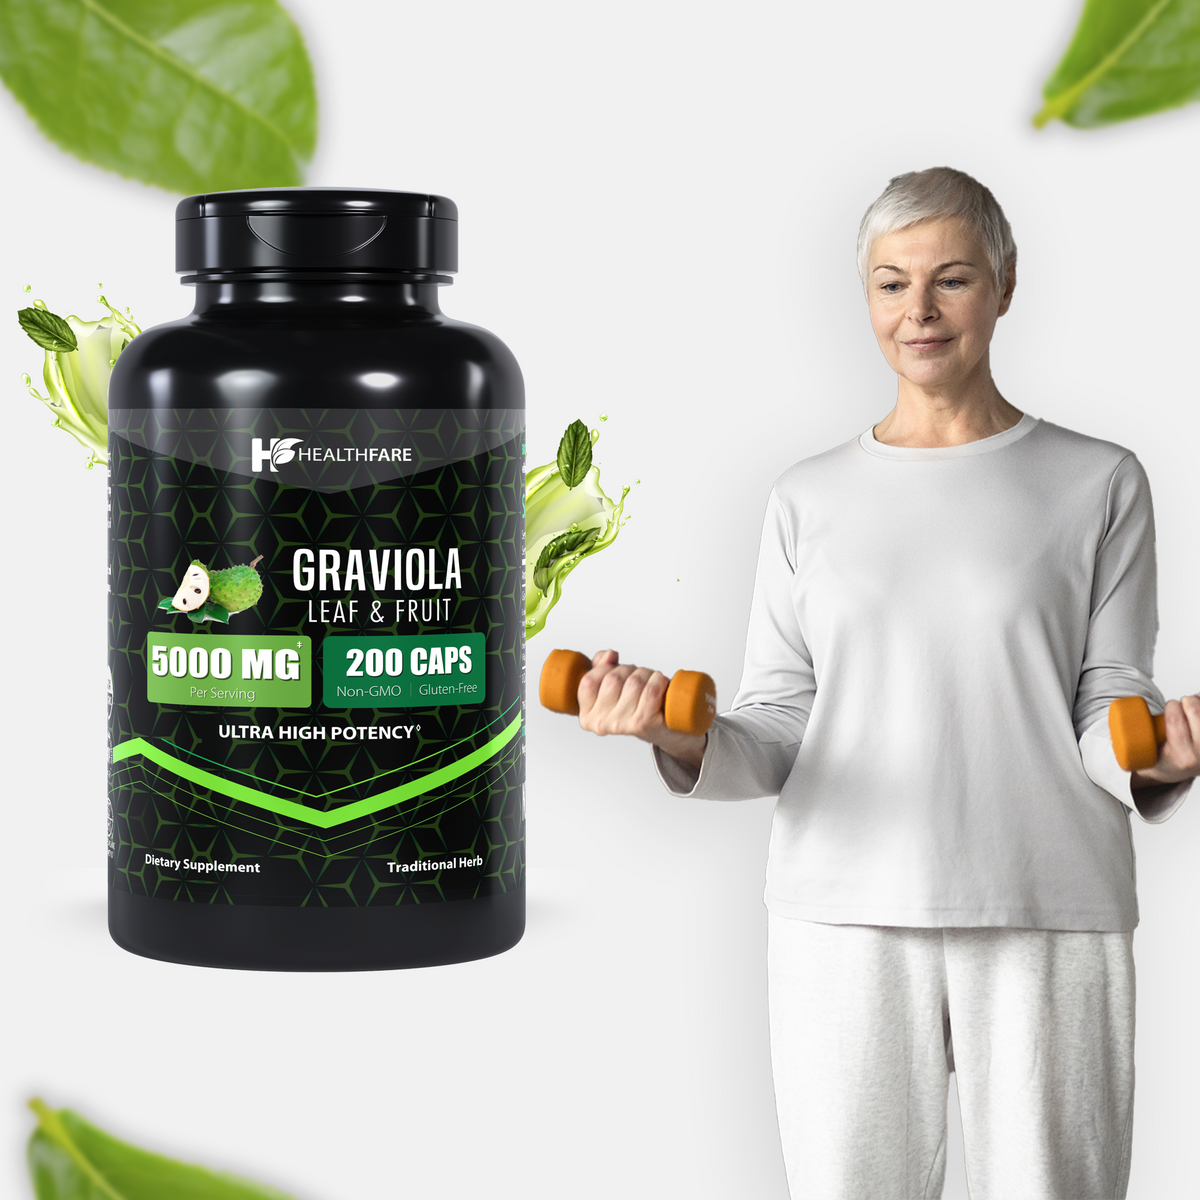 Graviola Leaf and Fruit Extract 5000mg (200 Capsules) - HealthFare